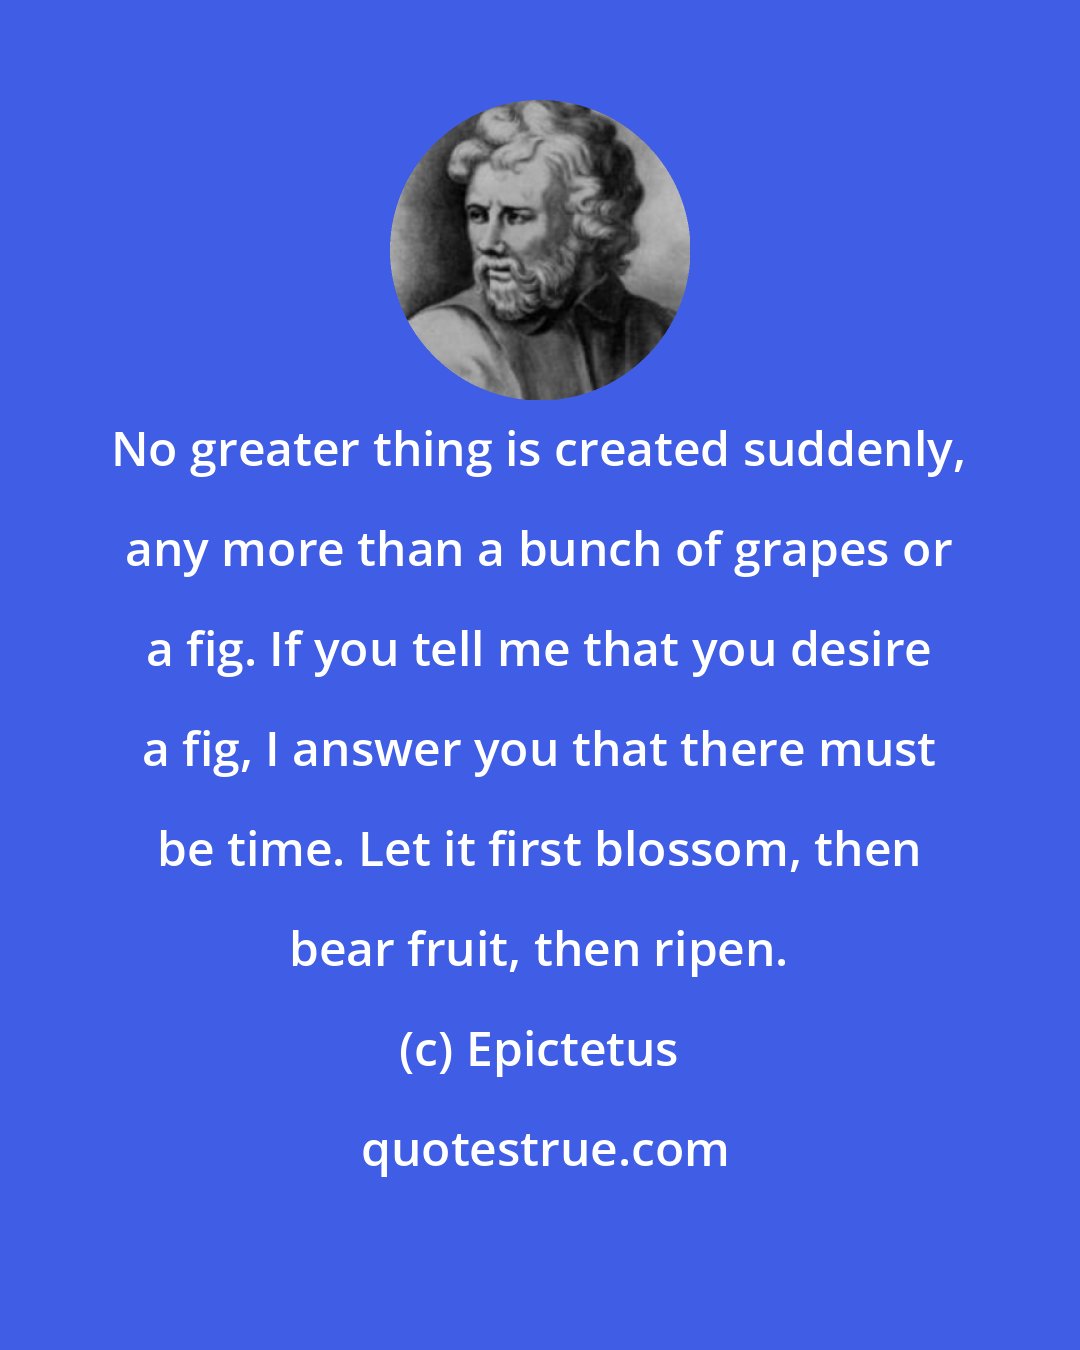 Epictetus: No greater thing is created suddenly, any more than a bunch of grapes or a fig. If you tell me that you desire a fig, I answer you that there must be time. Let it first blossom, then bear fruit, then ripen.